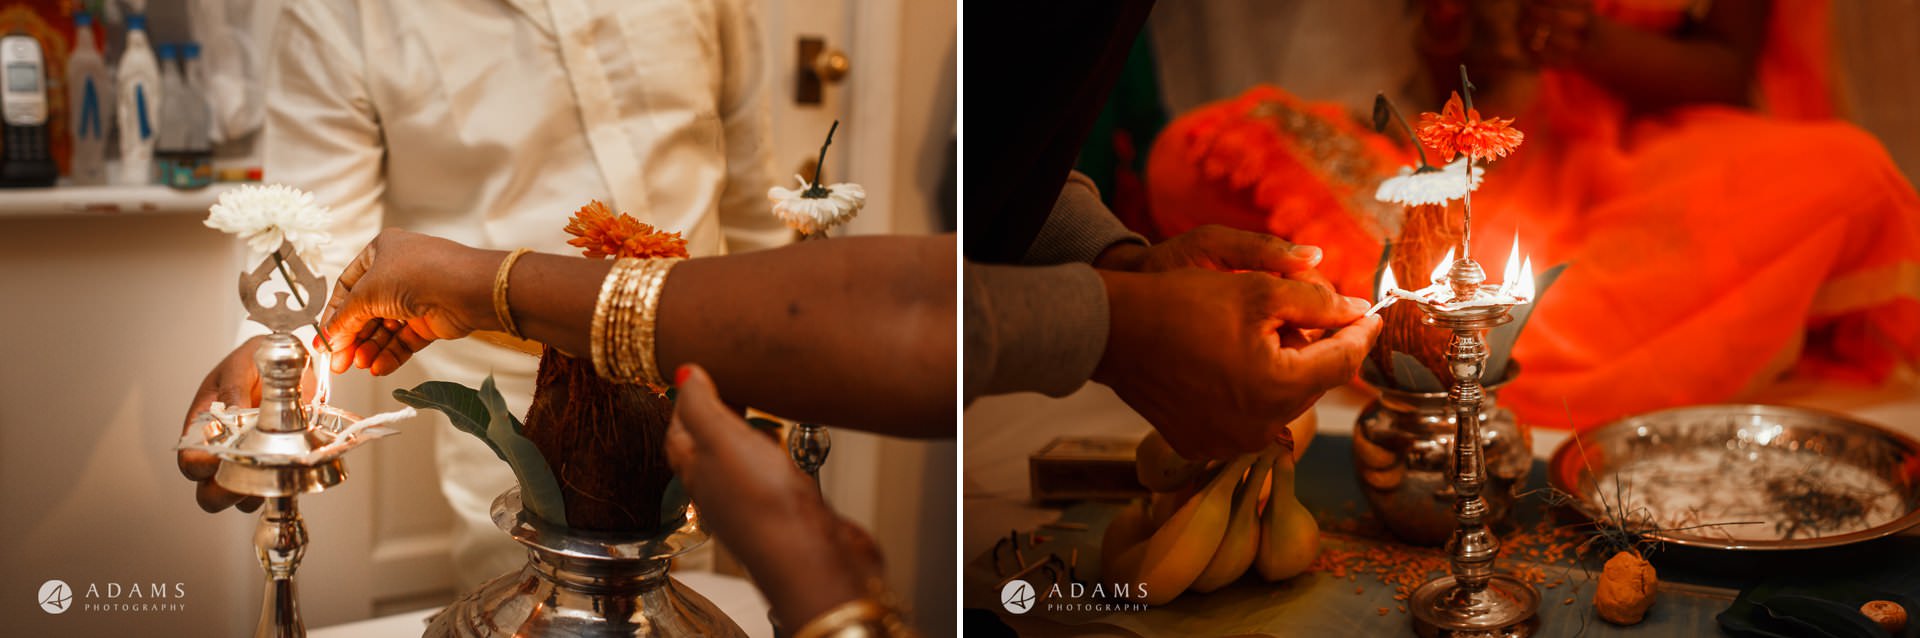 tamil wedding in traditional style